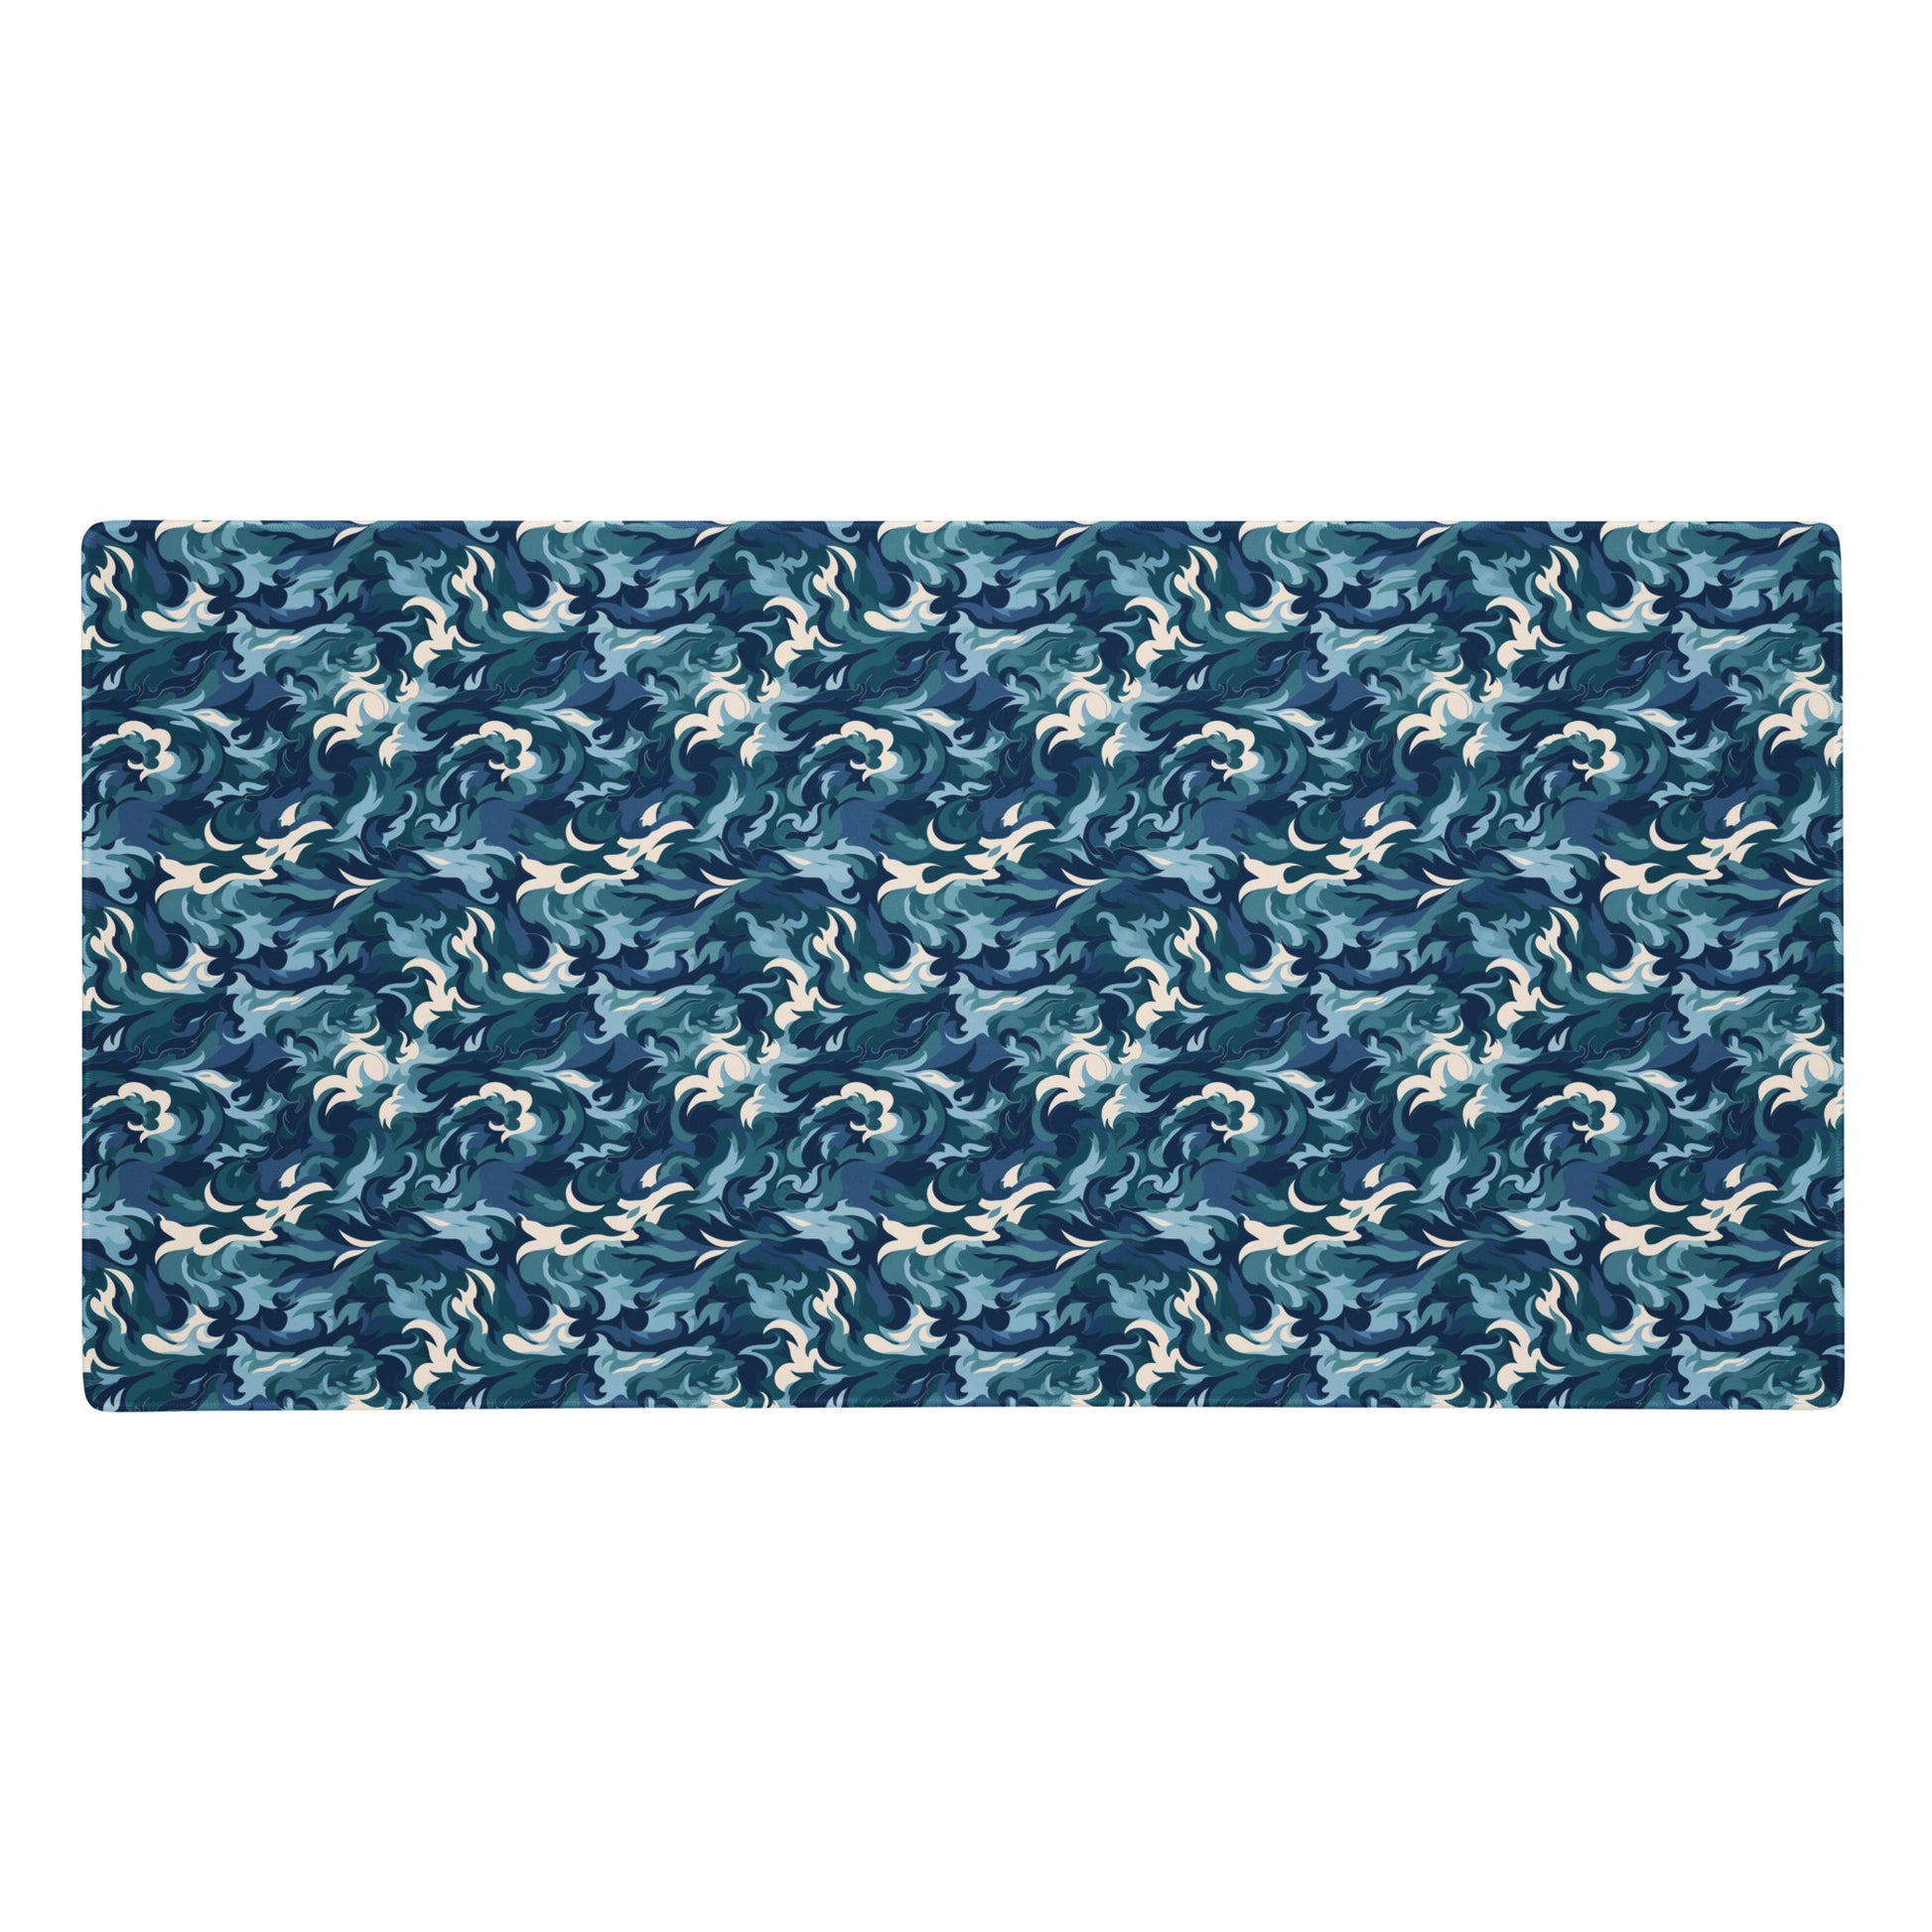 A 36" x 18" desk pad with a teal and white camo pattern.